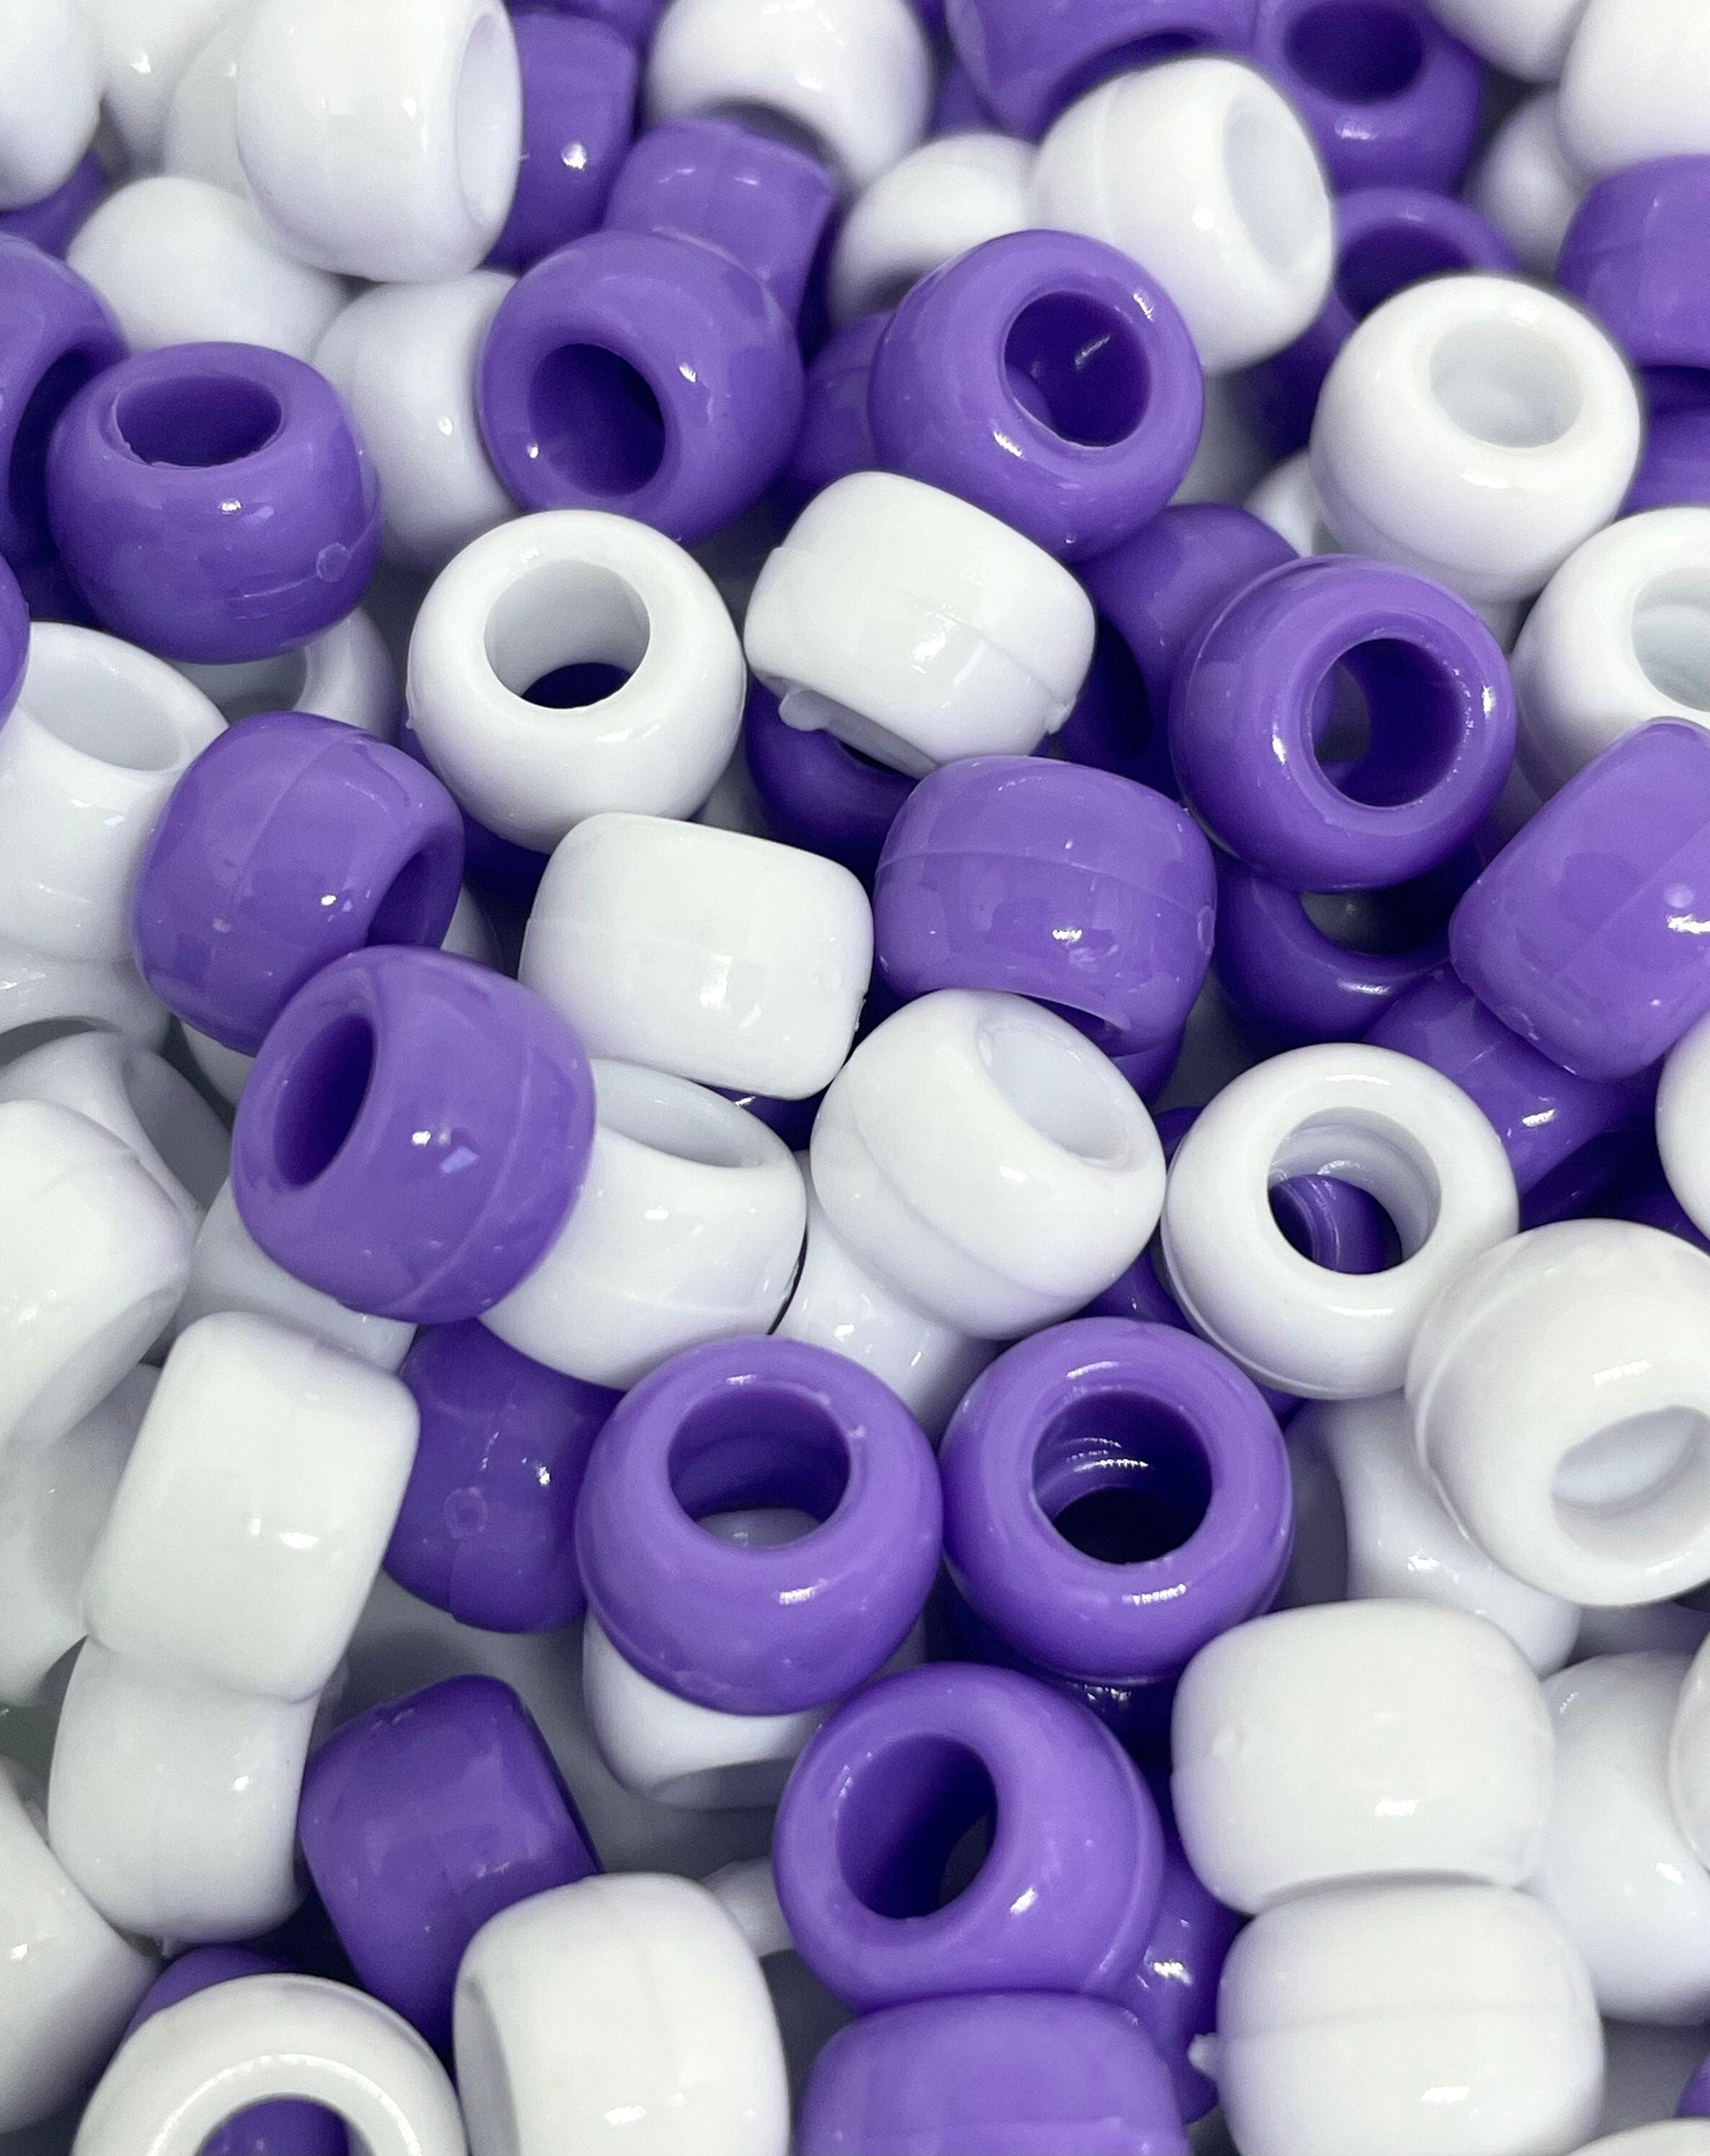 Lilac Purple and White Pony Beads, Lilac Purple Beads for Jewelry